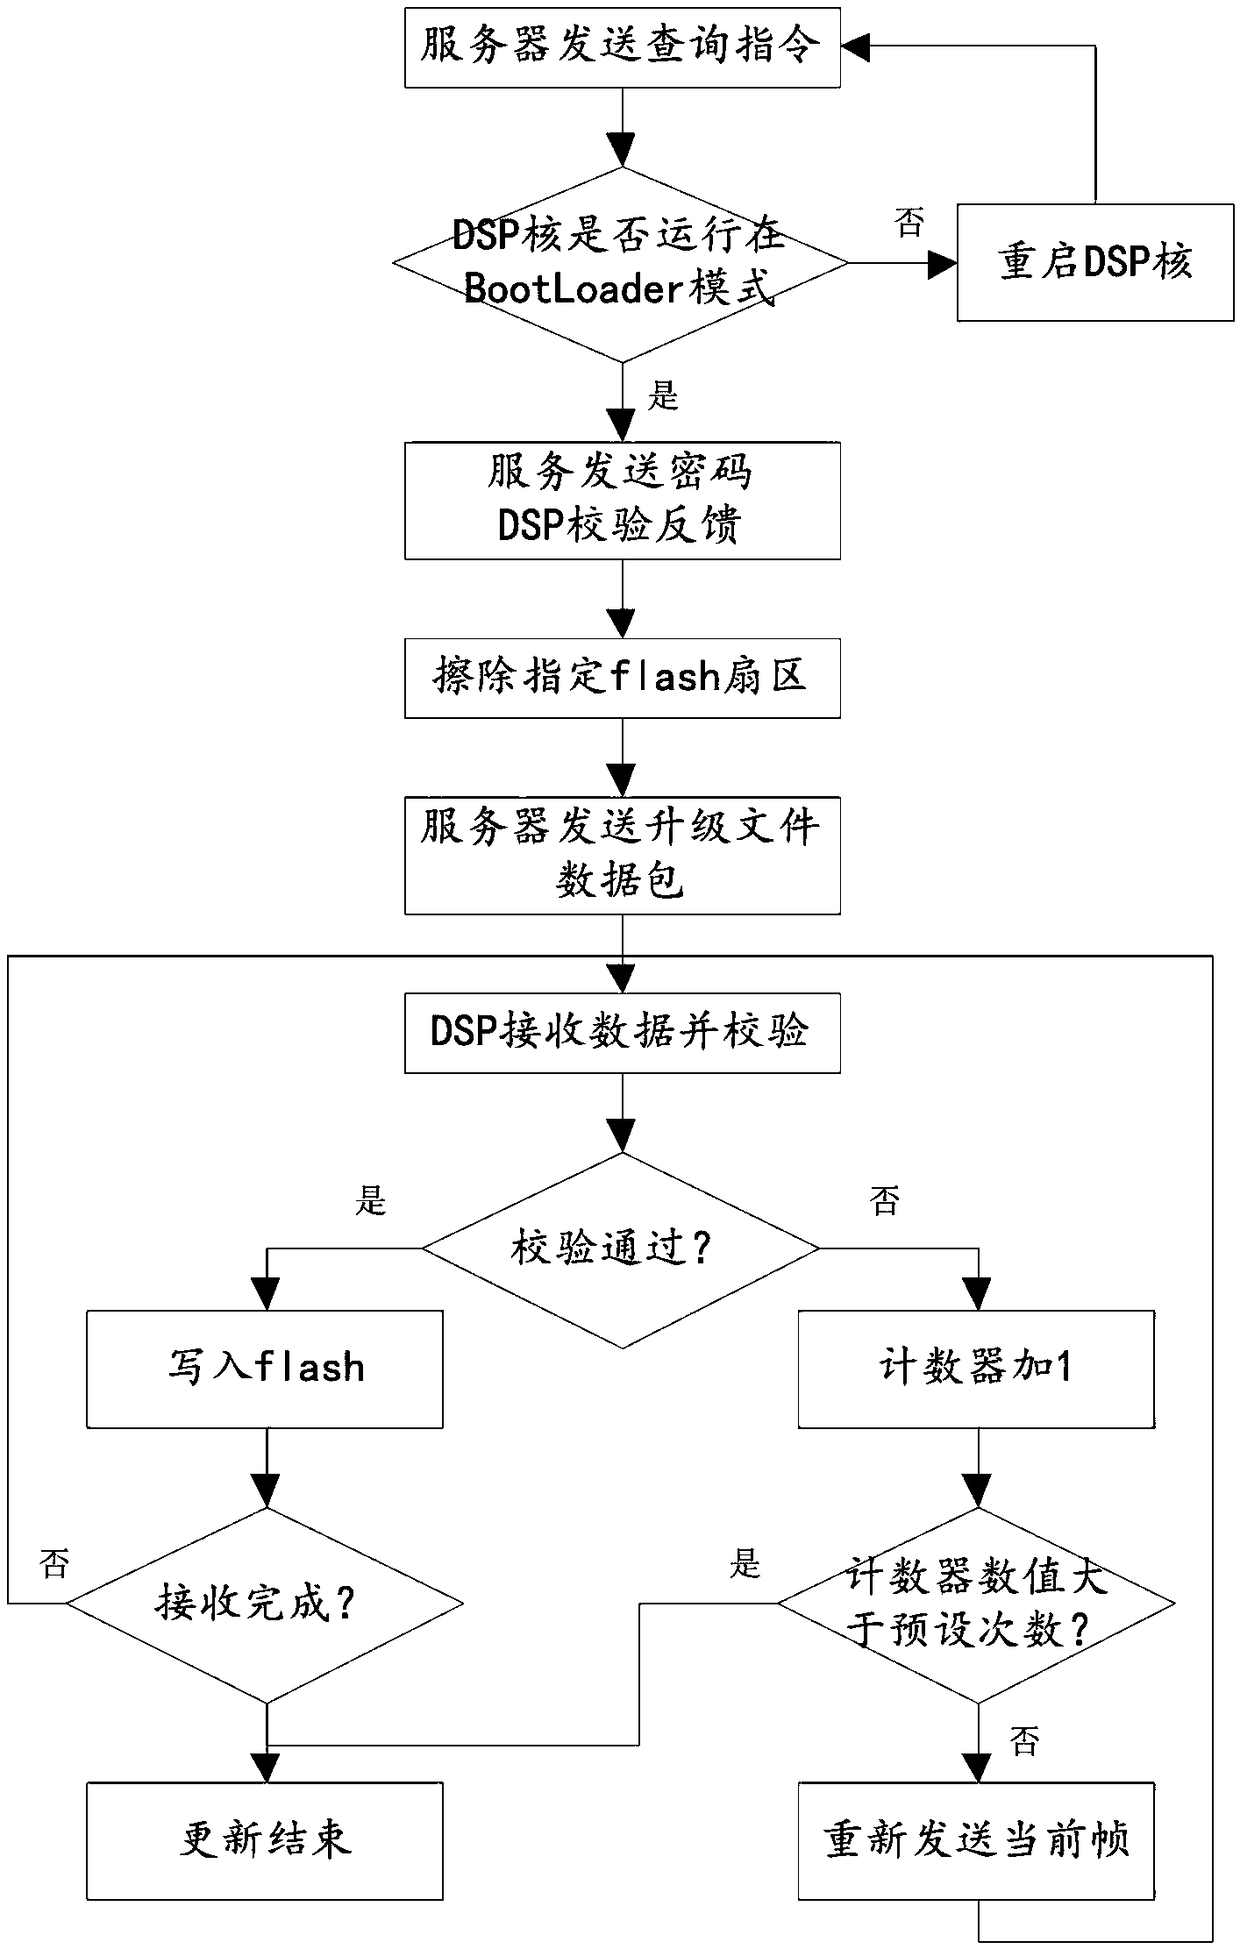 Method and system for dual-core DSP firmware upgrading based on CAN bus